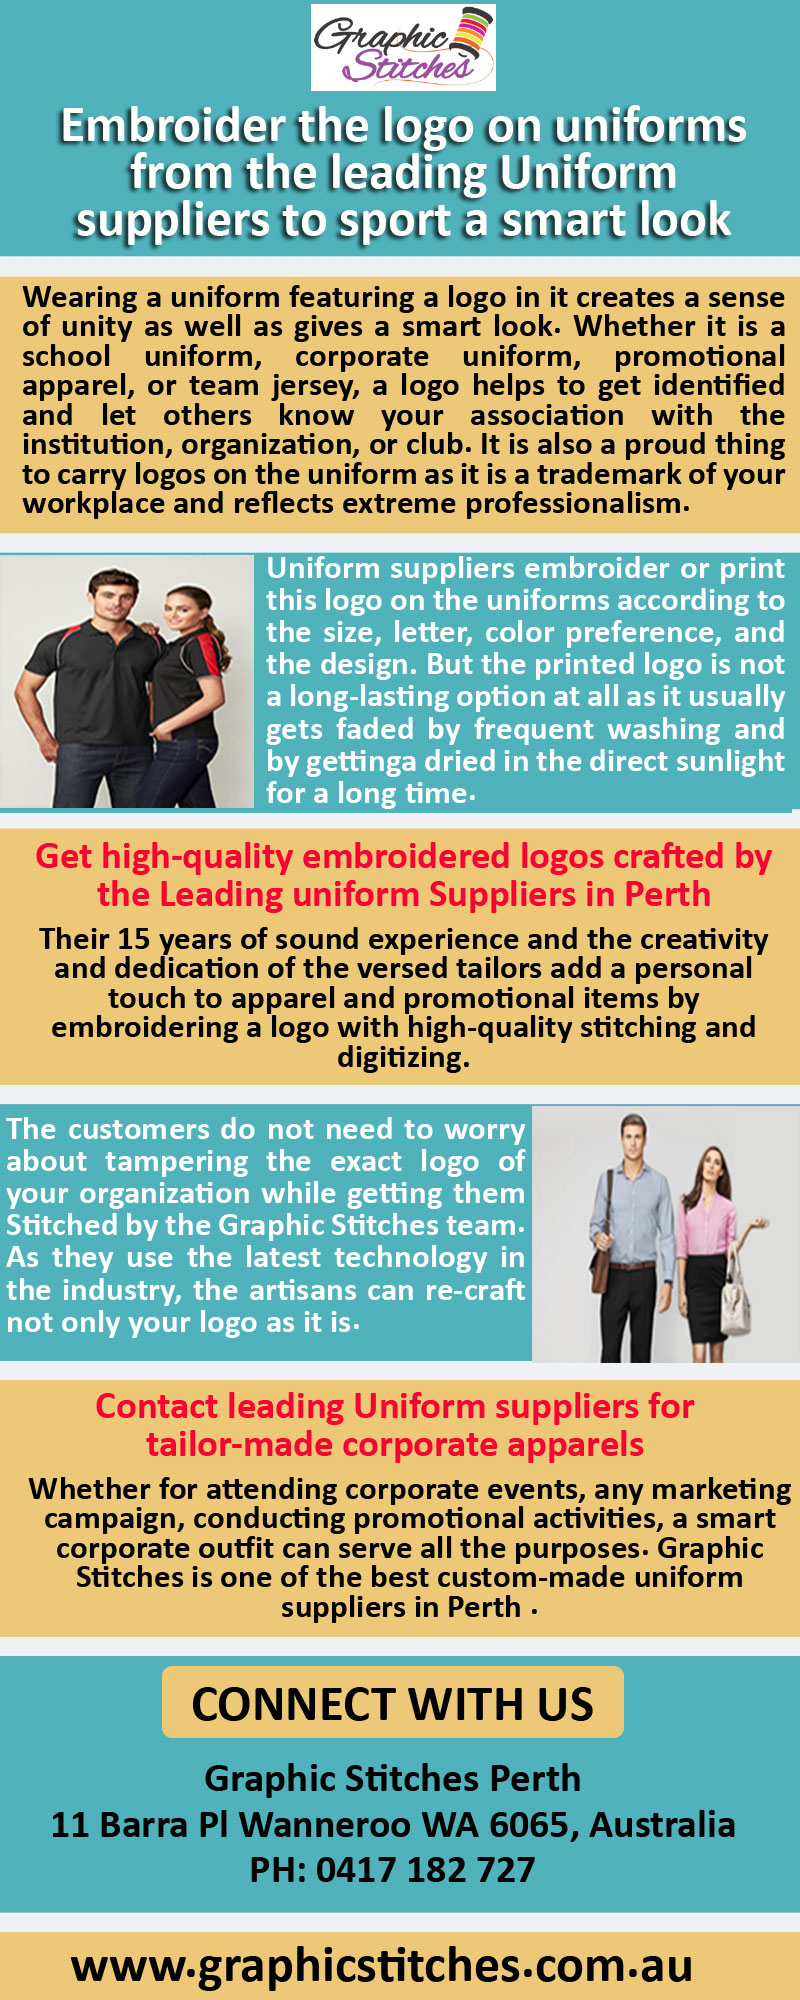 Embroider the logo on uniforms from the leading Uniform suppliers to sport a smart look.jpg  by Graphicstitches